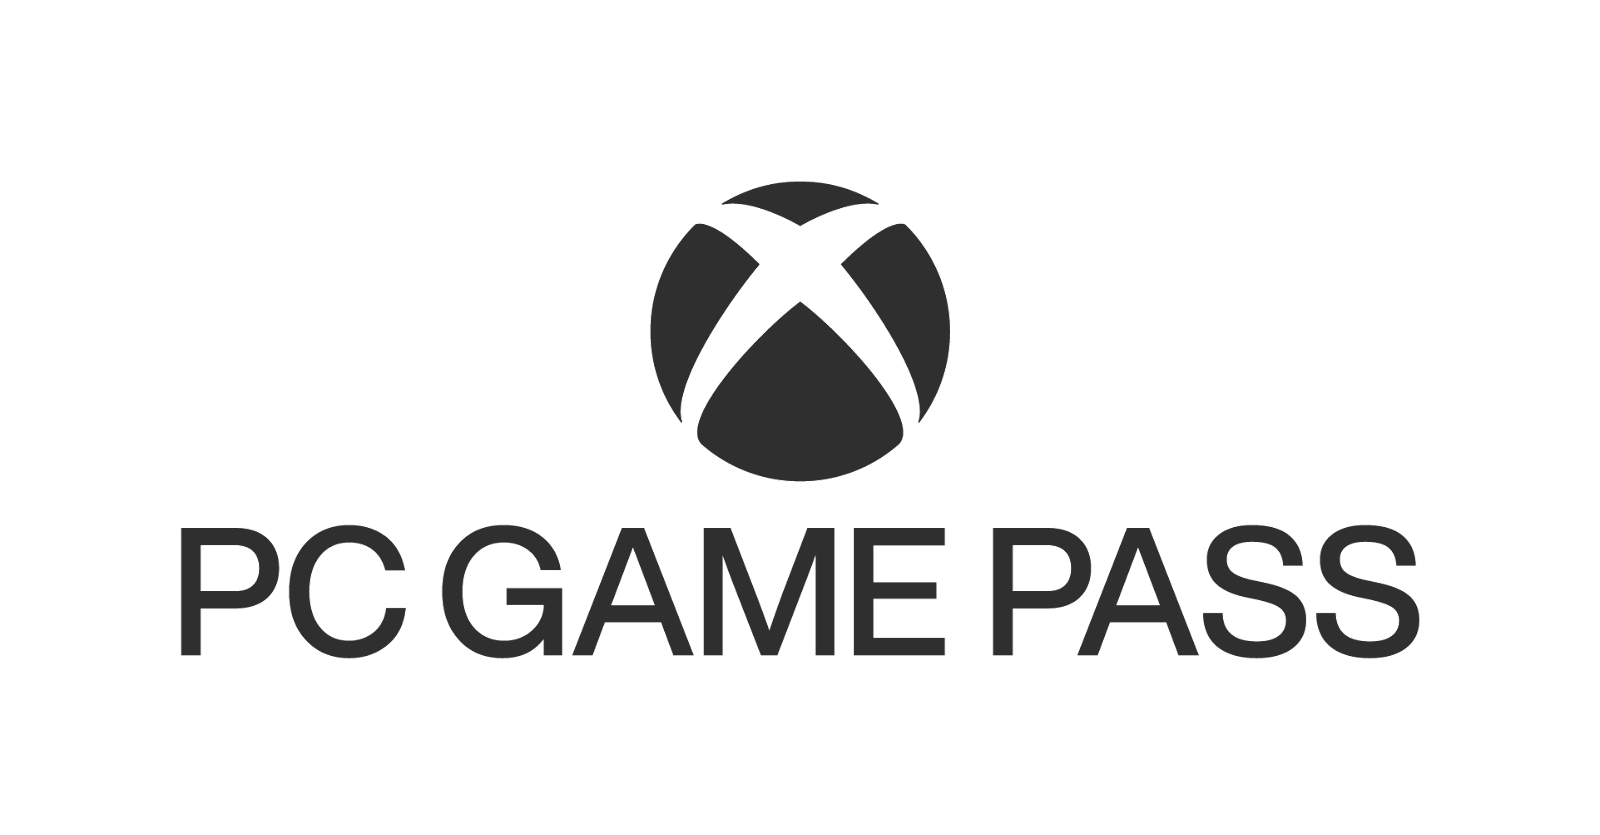 Xbox Game Pass explained: Everything you need to know